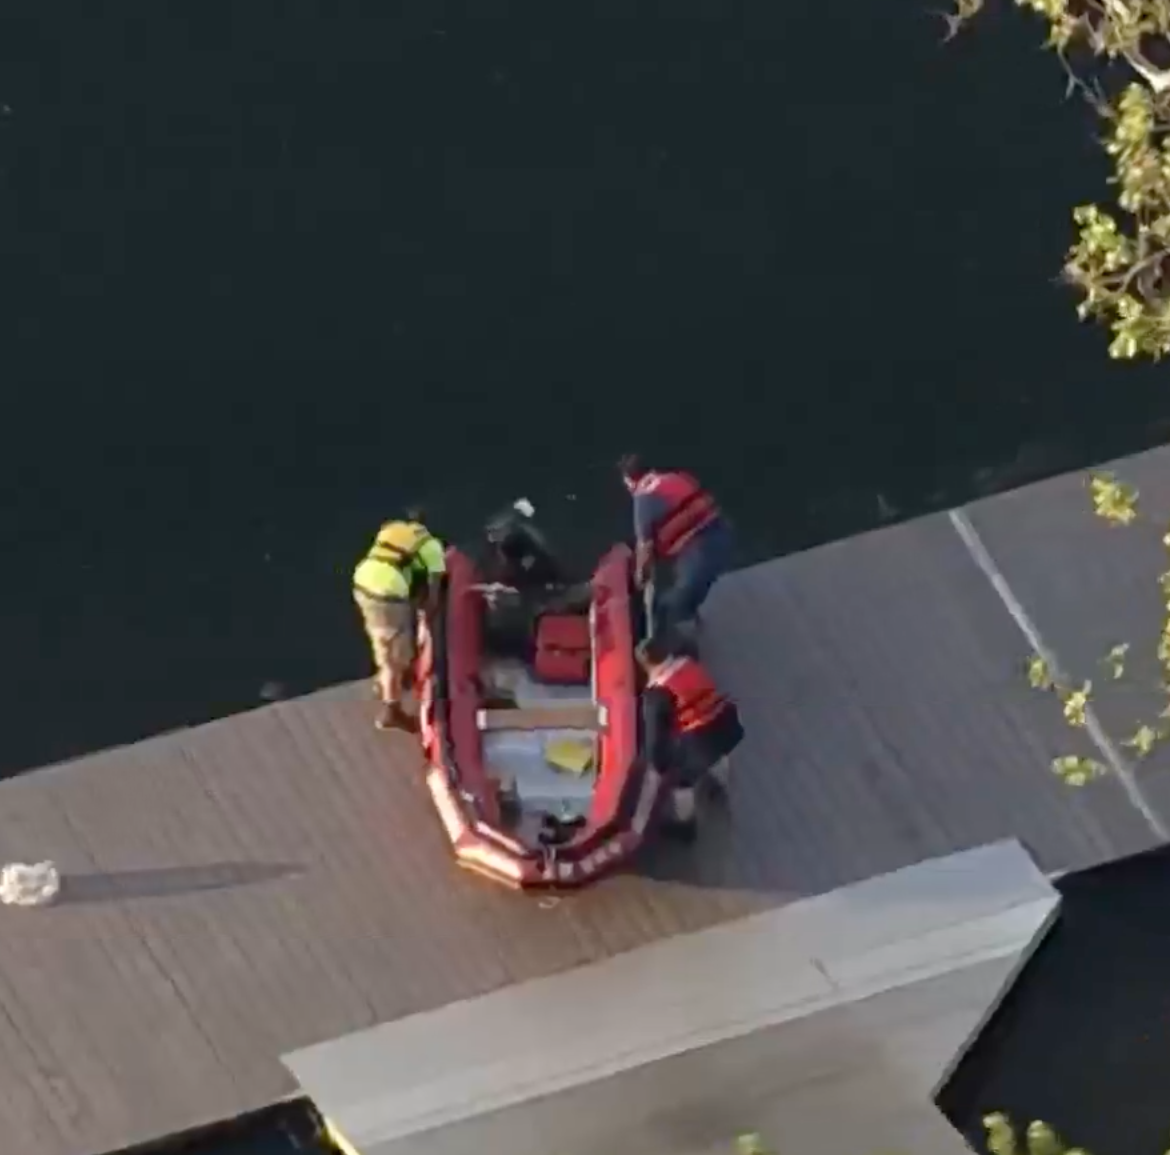 Search crew recovers body of missing Schuylkill River kayaker